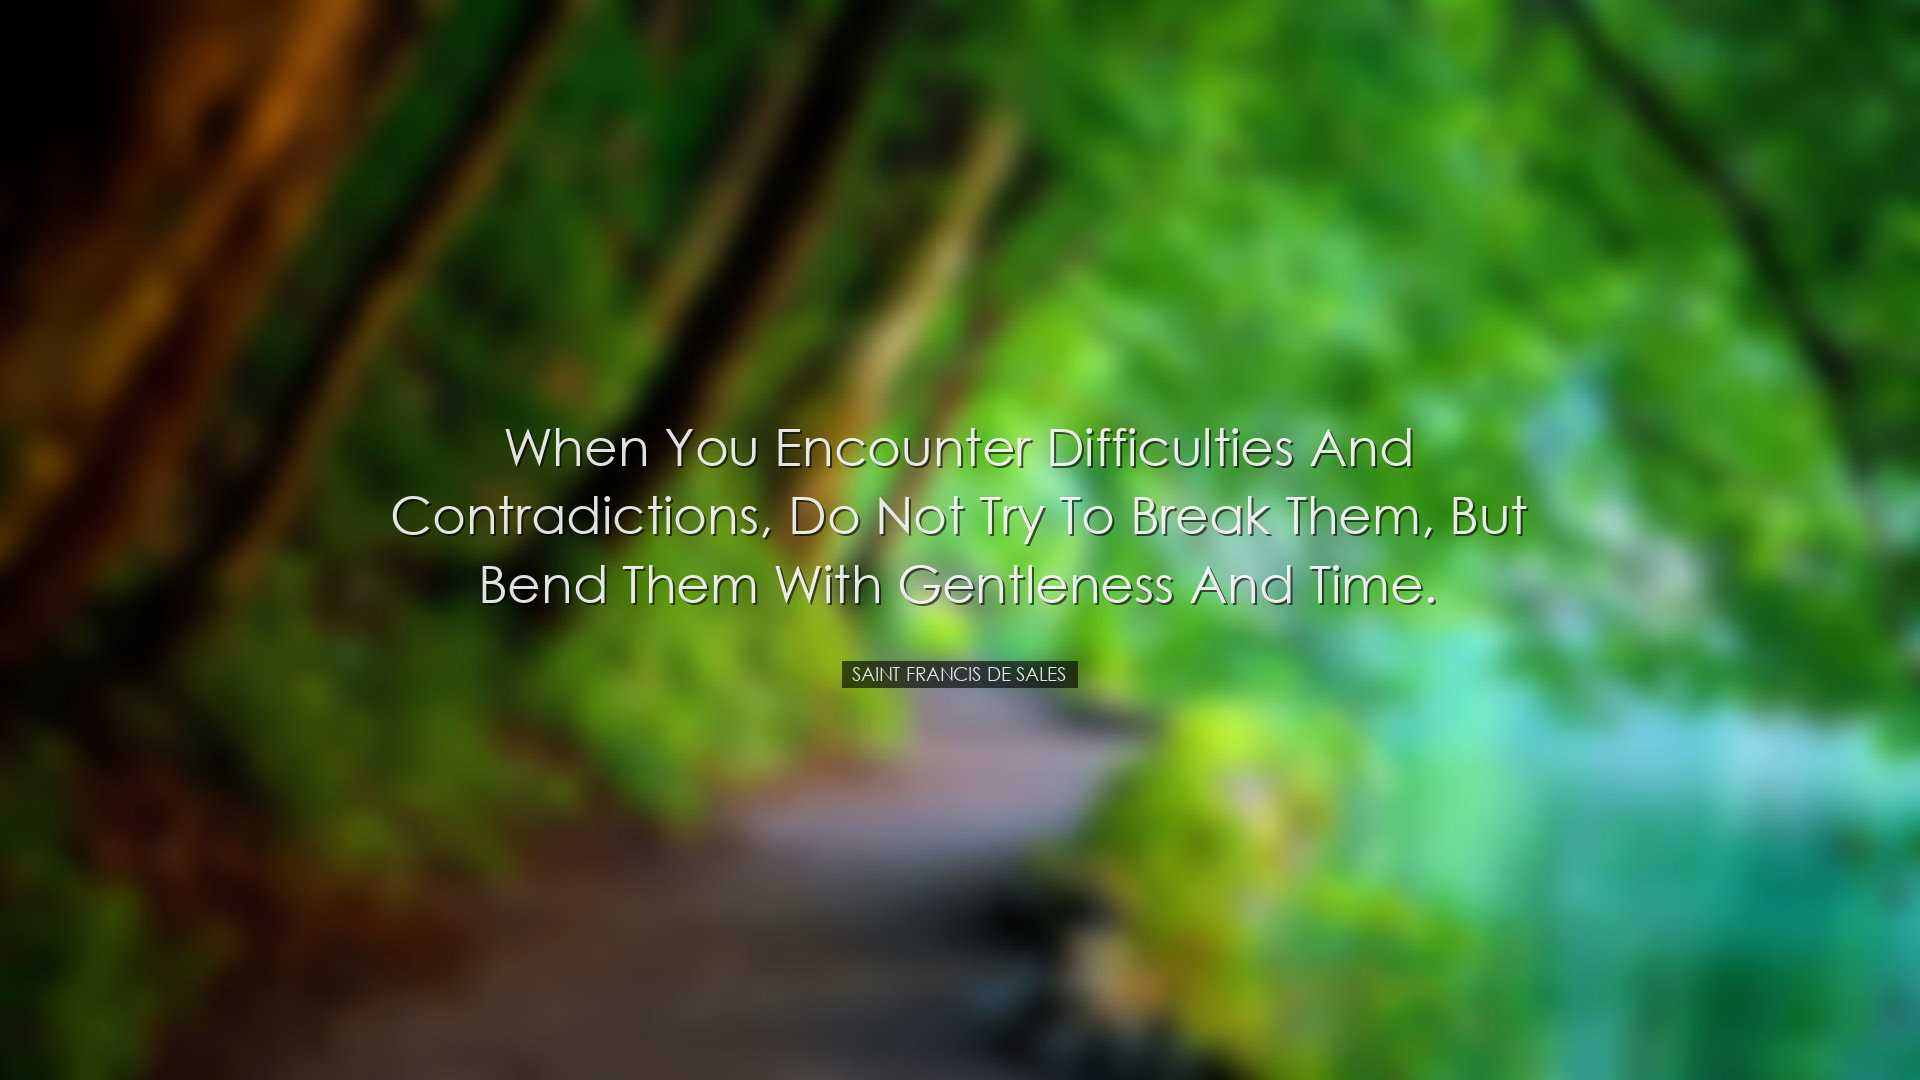 When you encounter difficulties and contradictions, do not try to